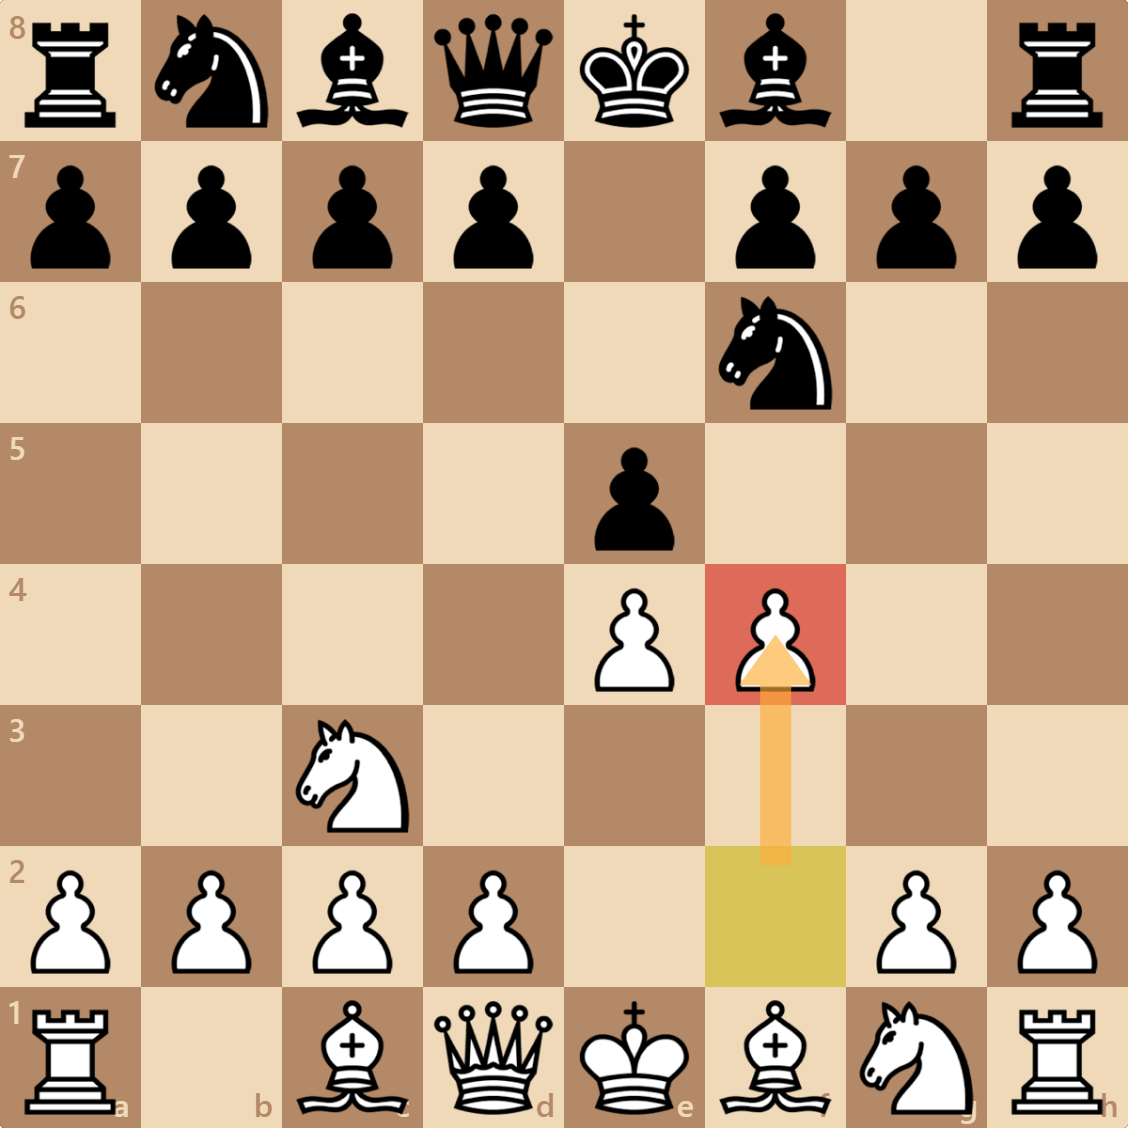 Queen's Gambit Accepted - Simple Solution to 1.d4 (7h Running Time)